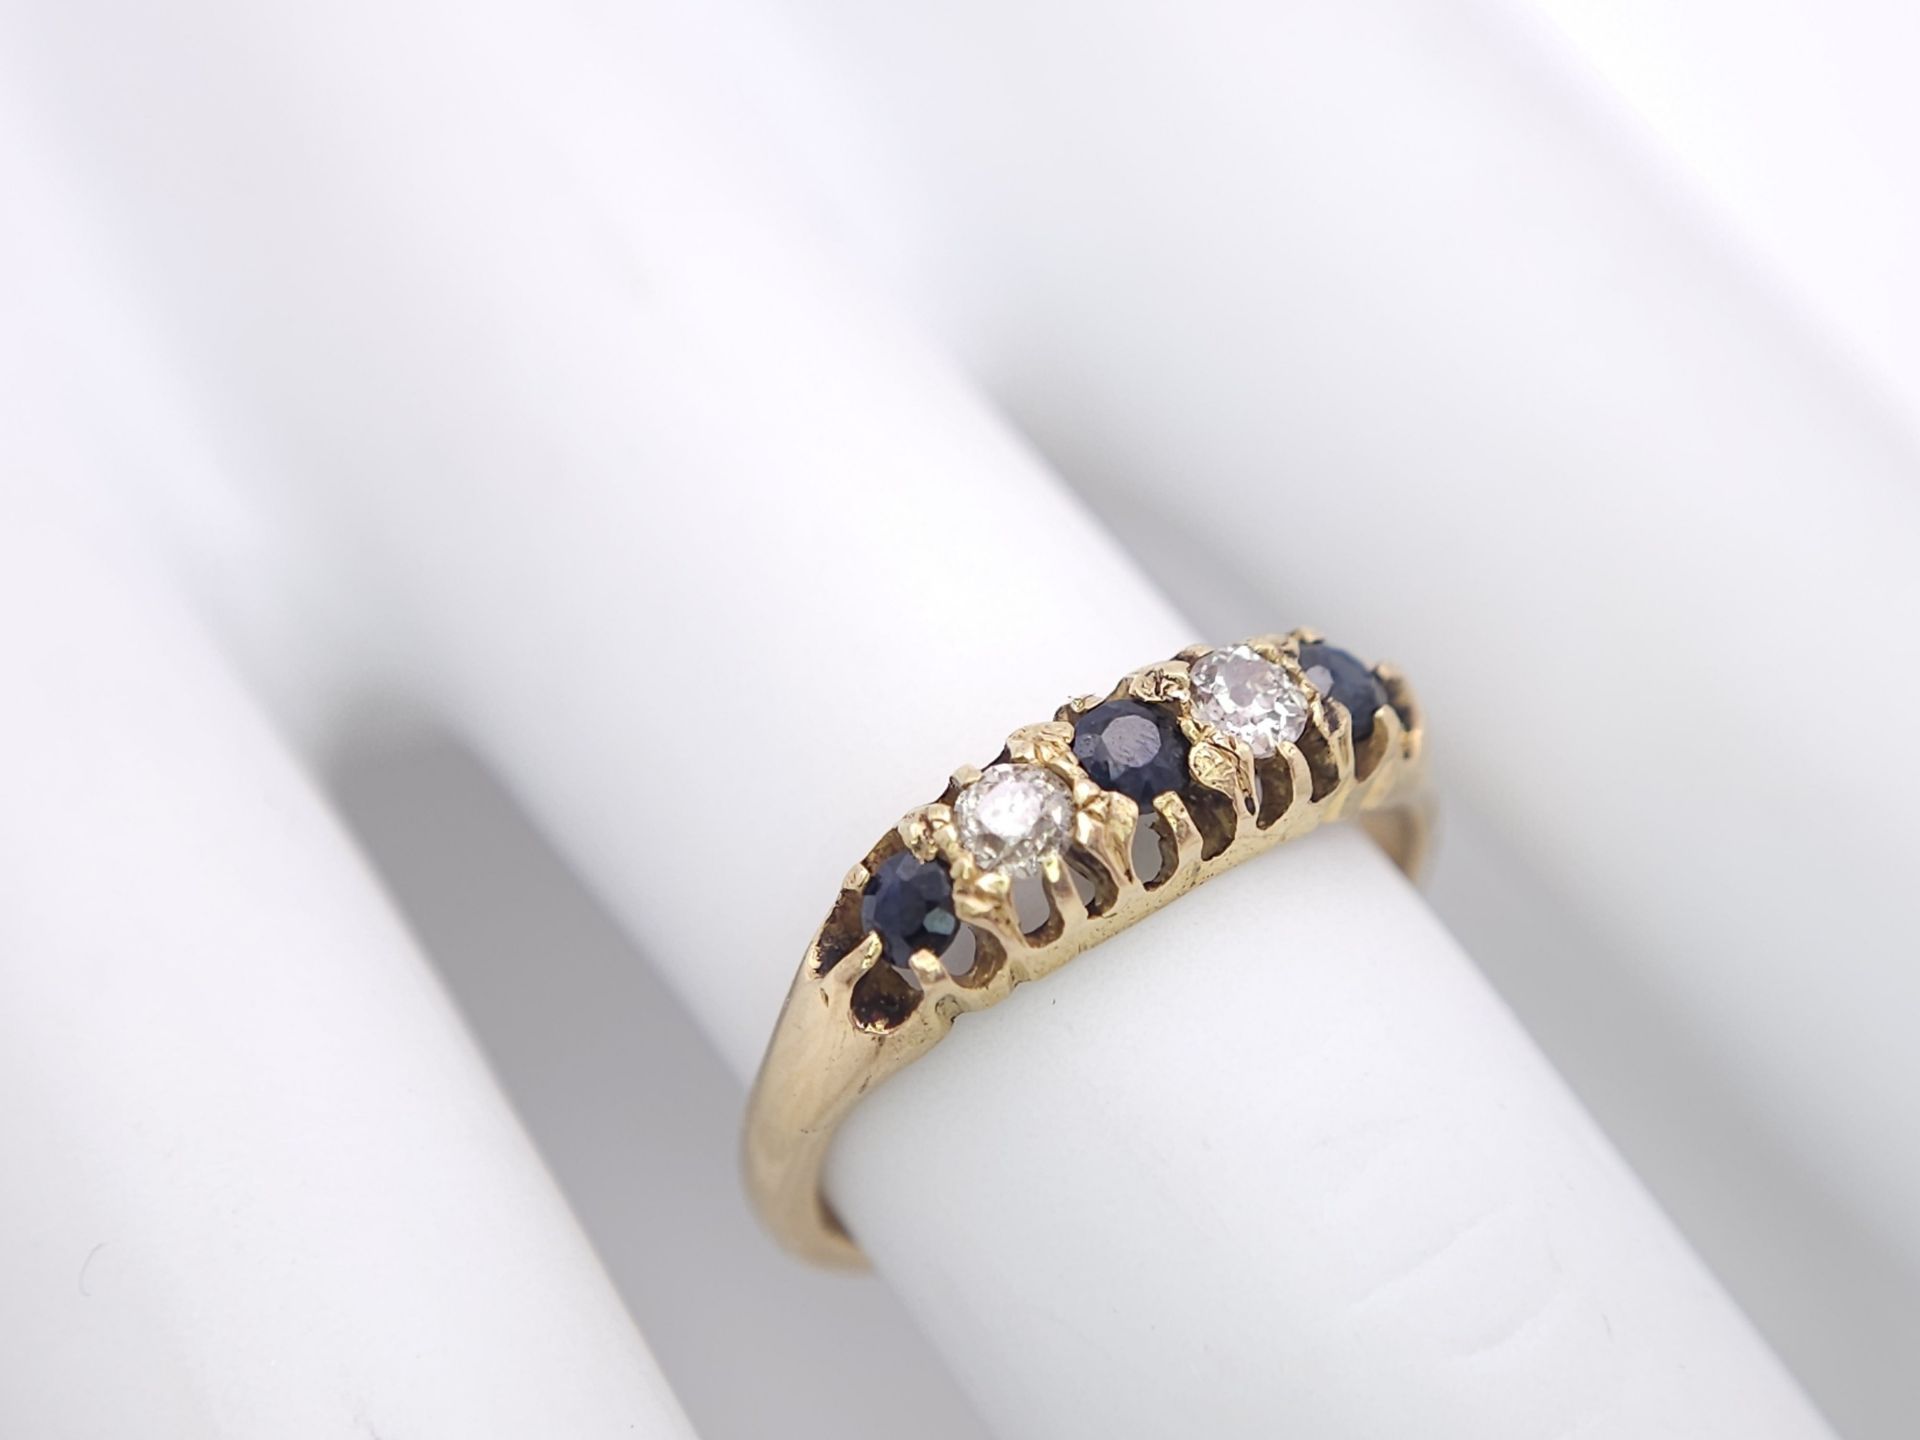 AN 18K YELLOW GOLD (TESTS AS) VINTAGE DIAMOND AND SAPPHIRE OLD CUT RING. 0.15CT OLD CUT DIAMONDS. - Image 5 of 5